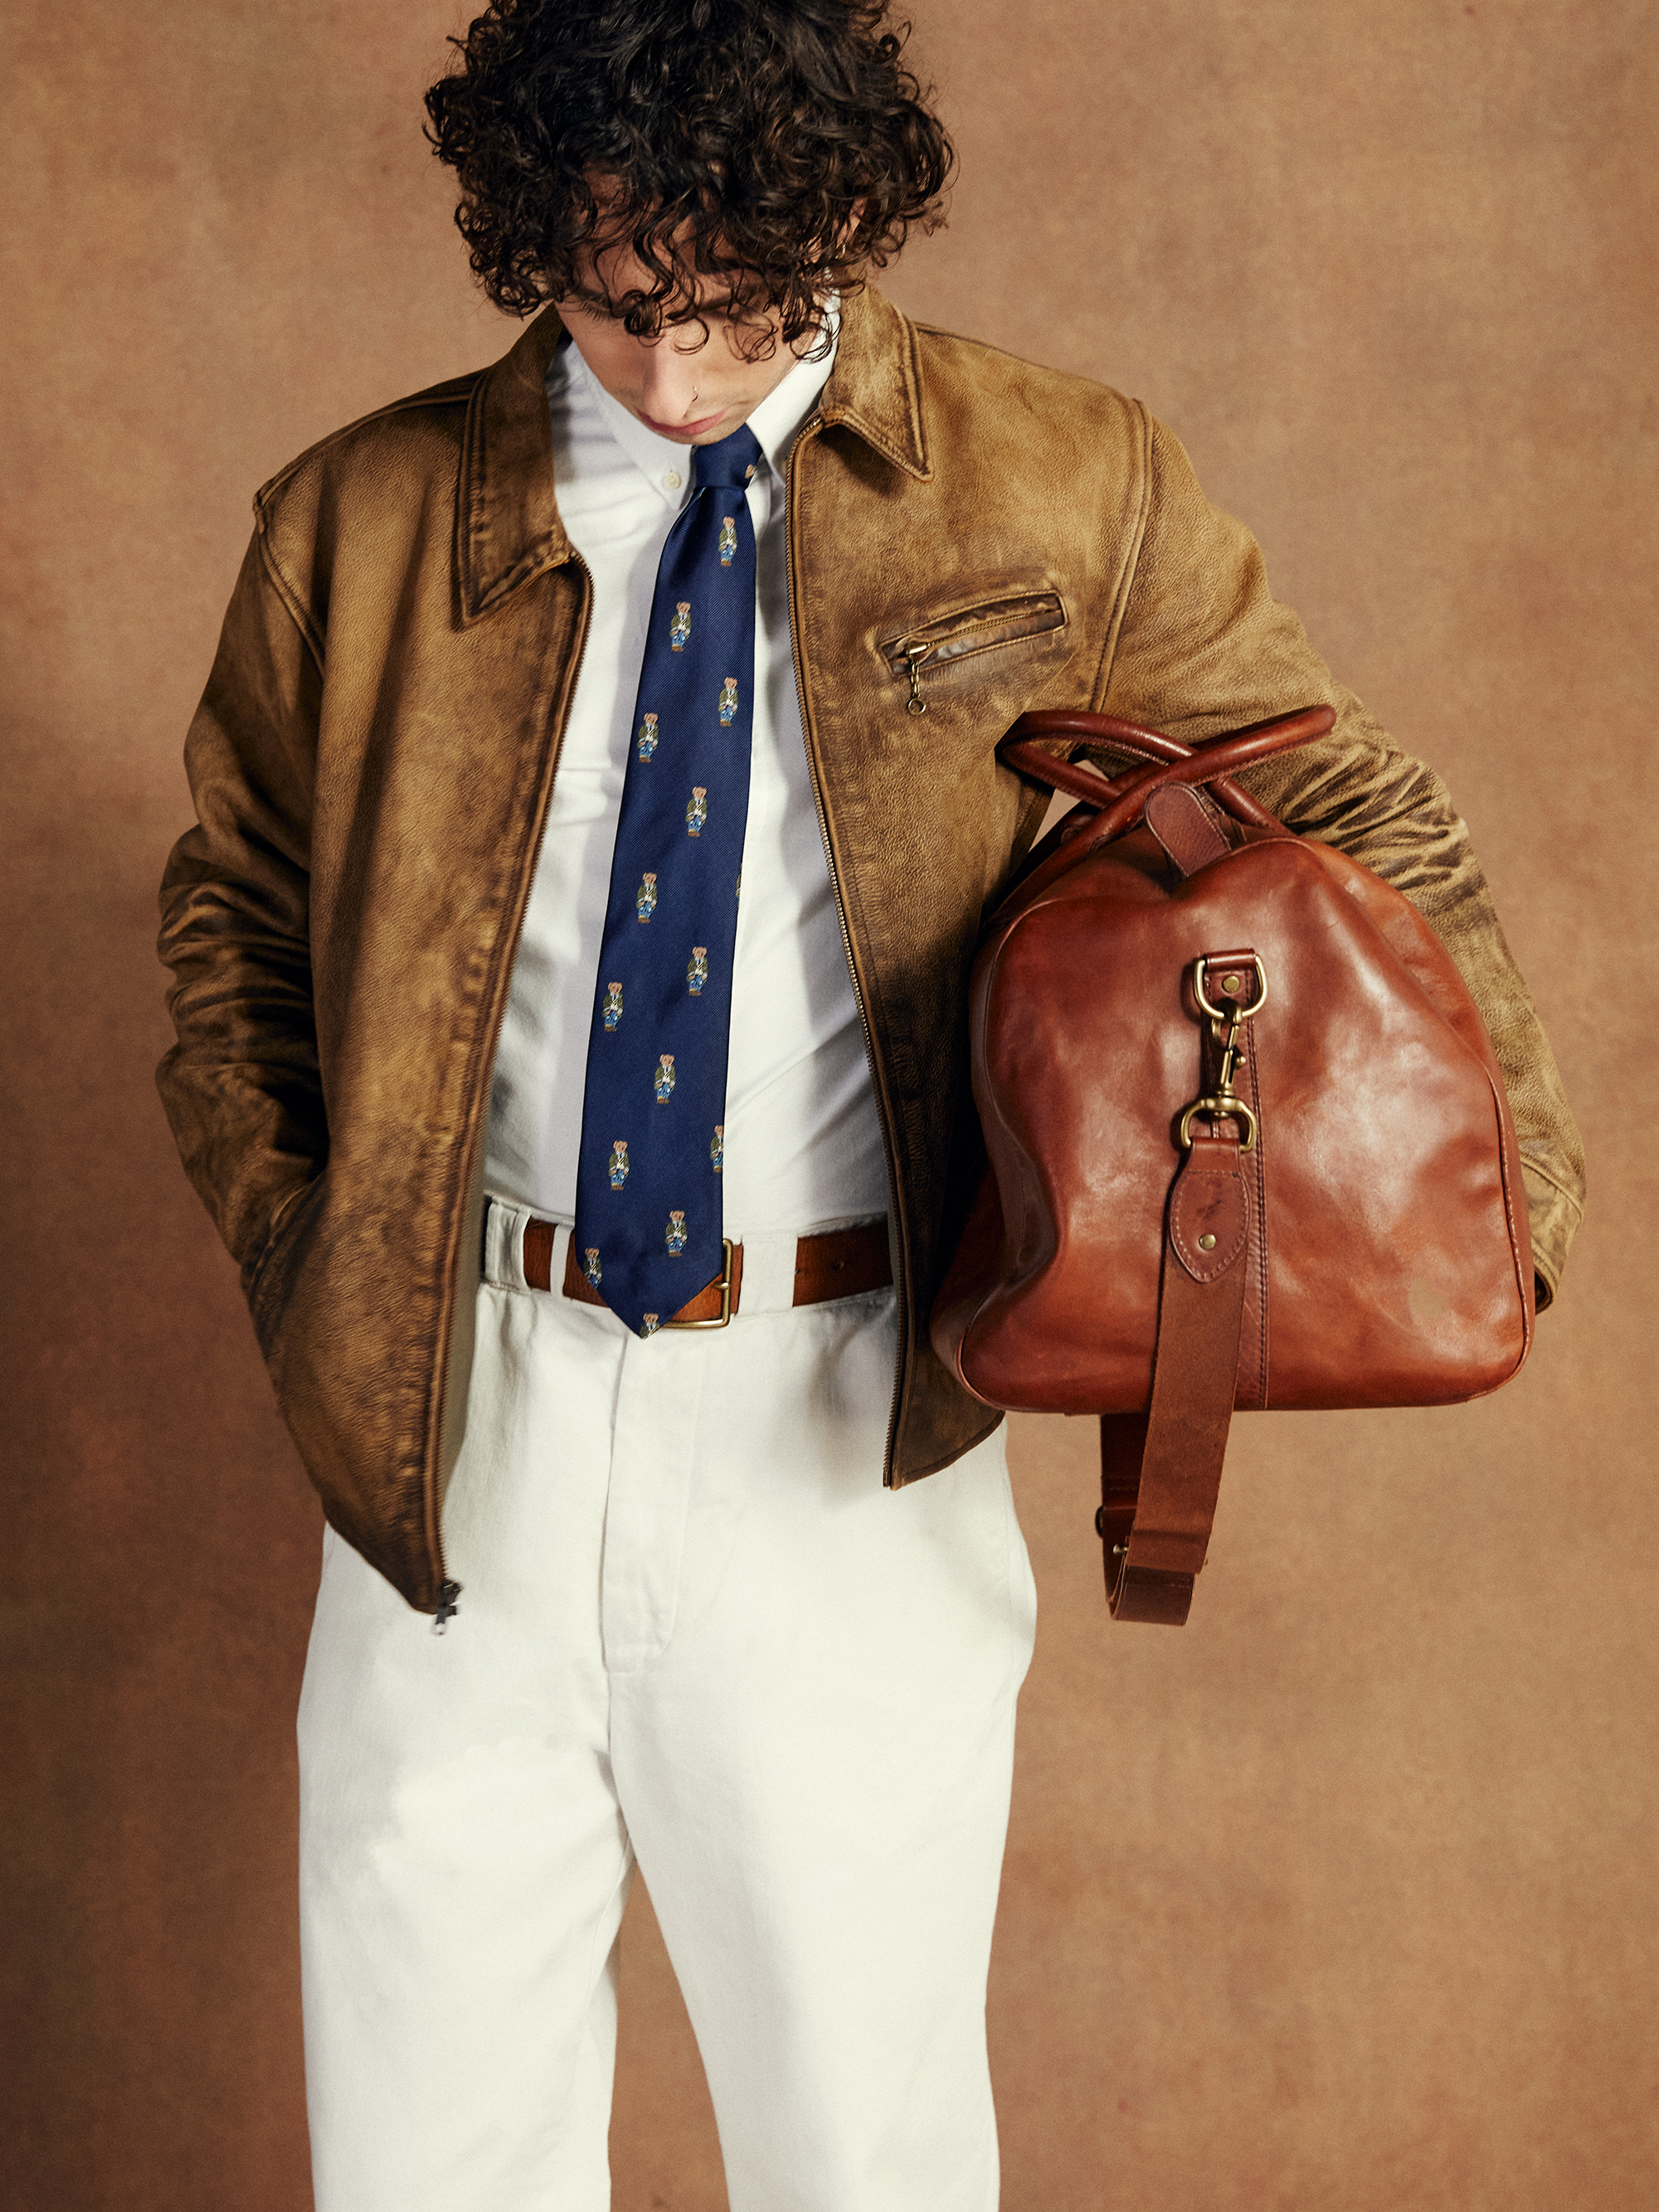 Model looks downwards carrying a suitcase and wearing a white shirt with a tie and a jacket